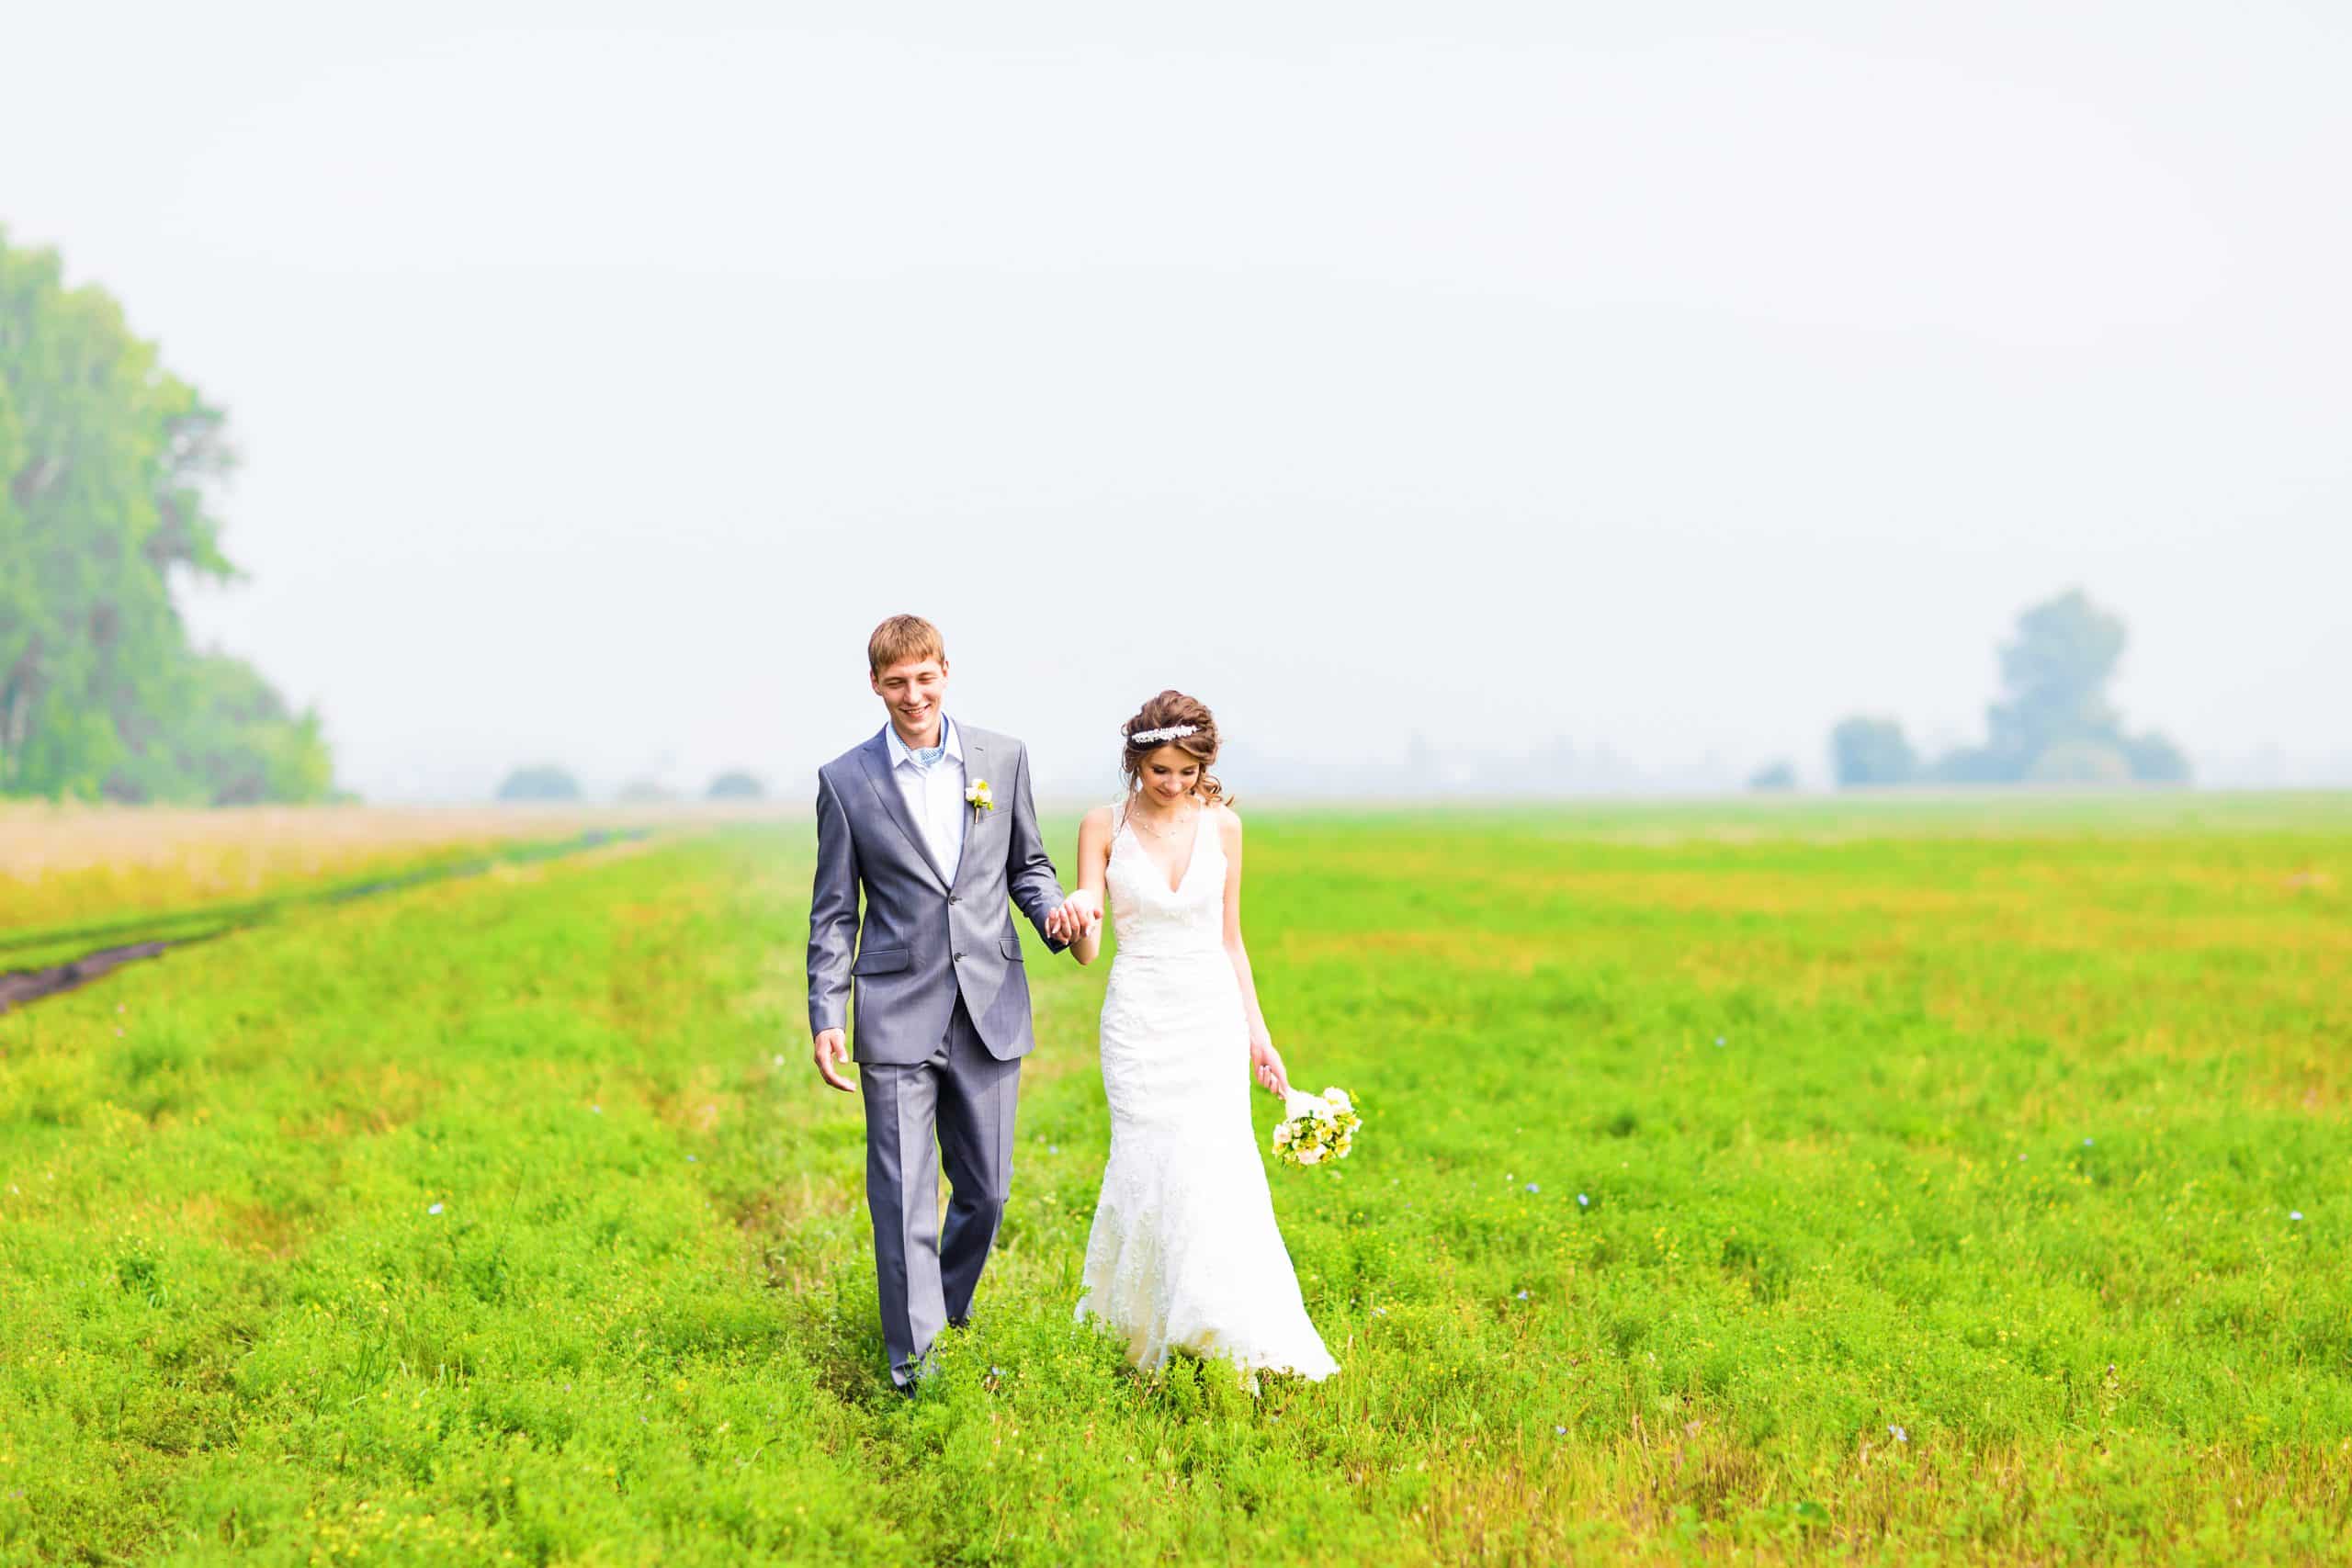 A young couple in love bride and groom, wedding day in summer. Enjoy a moment of happiness and love in a  field. Bride in a luxurious wedding dress on a background bright blue sky with clouds